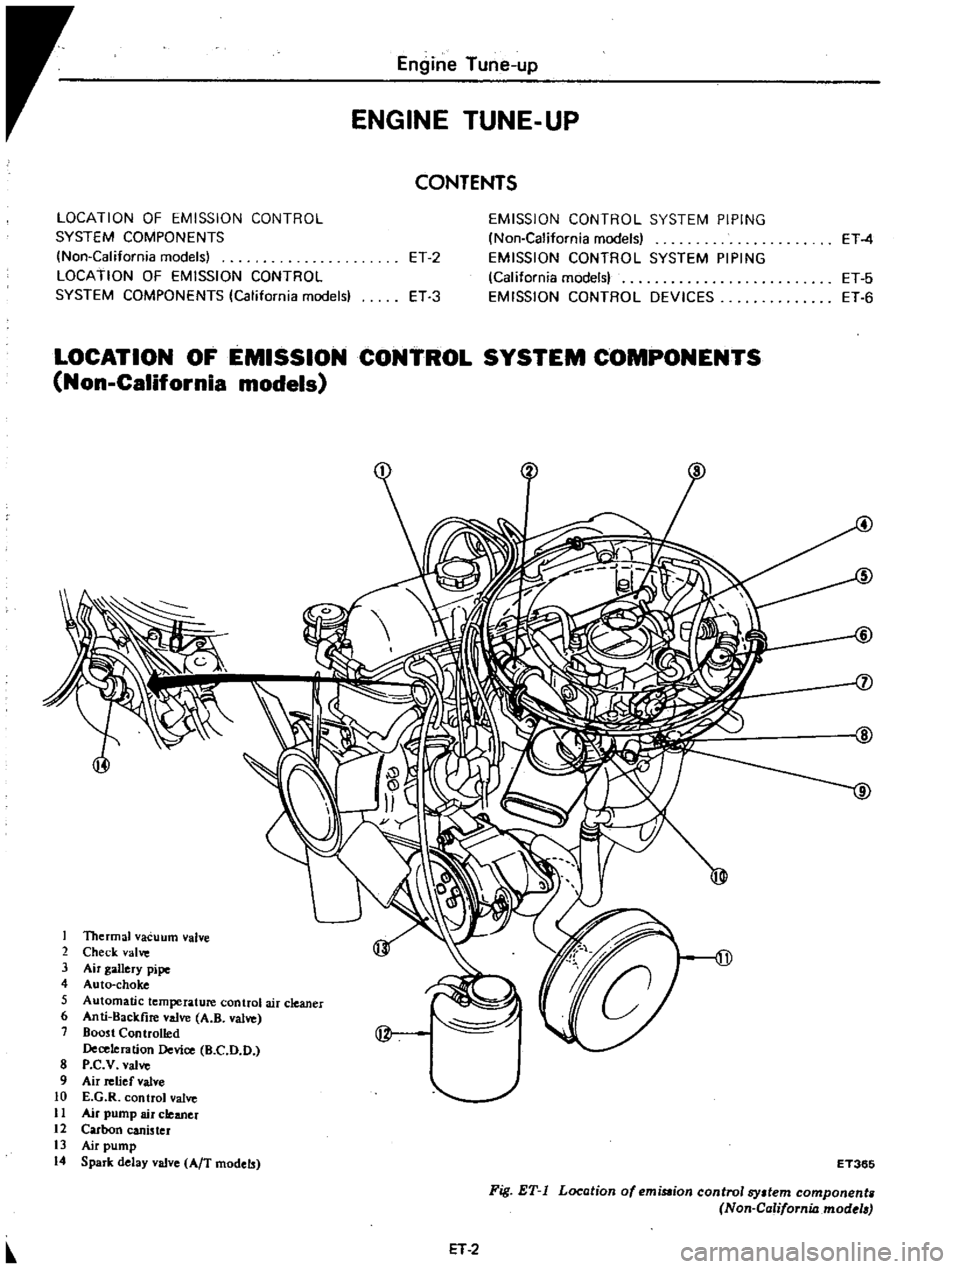 DATSUN PICK-UP 1977 User Guide 
Engine 
Tune

up

ENGINE

TUNE 
UP

CONTENTS

LOCATION 
OF 
EMISSION

CONTROL

SYSTEM 
COMPONENTS

INon 
California 
models

LOCATION 
OF 
EMISSION 
CONTROL

SYSTEM

COMPONENTS 
California 
models 
E